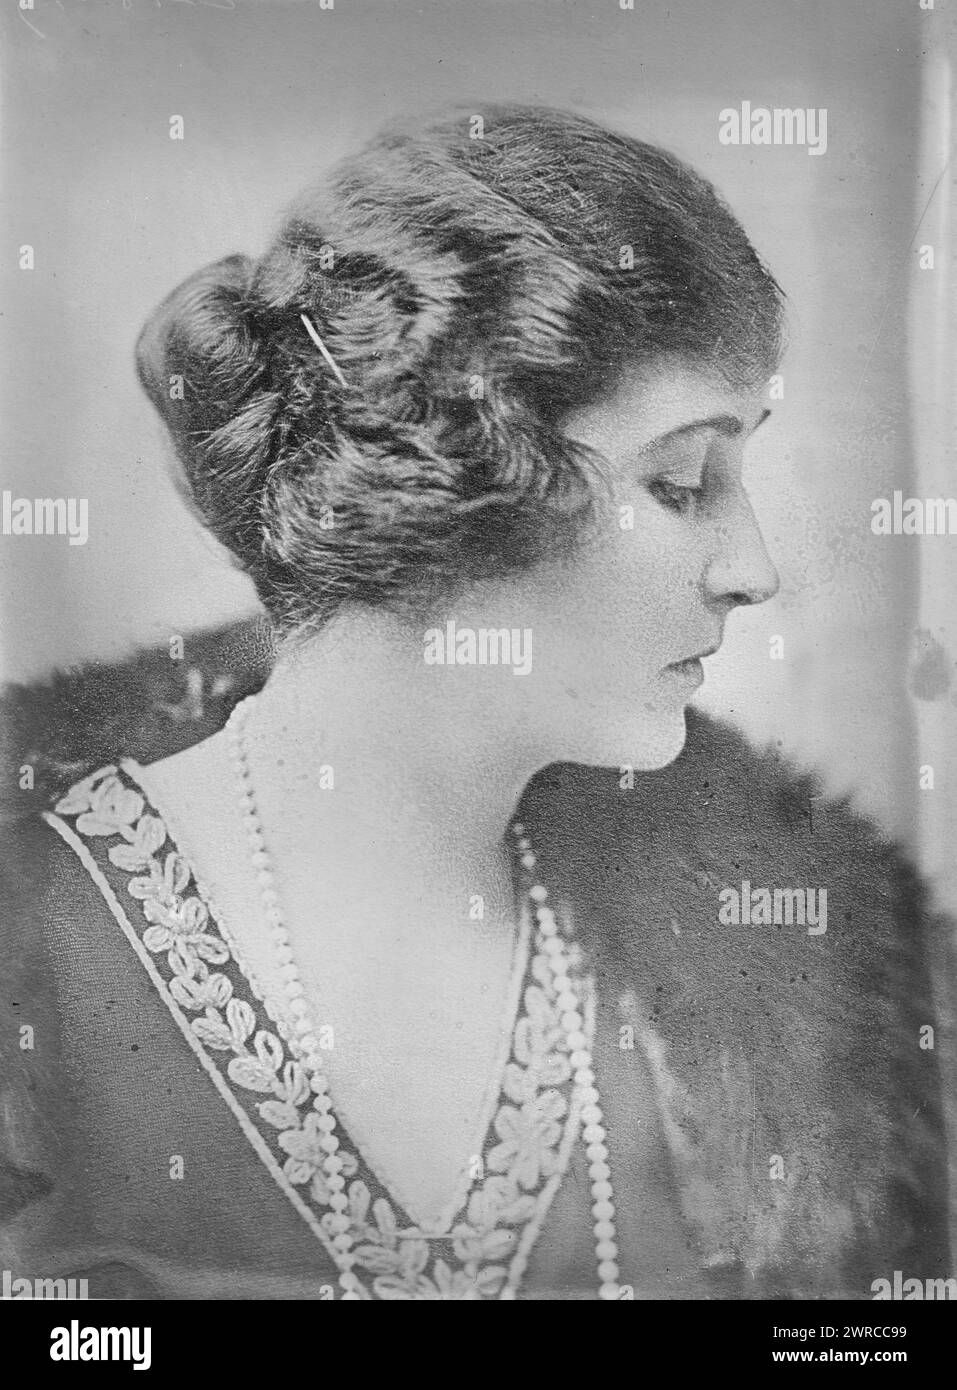 Princess Patricia, Photograph shows Princess Patricia of Connaught (Lady Patricia Ramsay) (1886-1974)who married Alexander Ramsay in 1919., 1919 Feb. 2, Glass negatives, 1 negative: glass Stock Photo